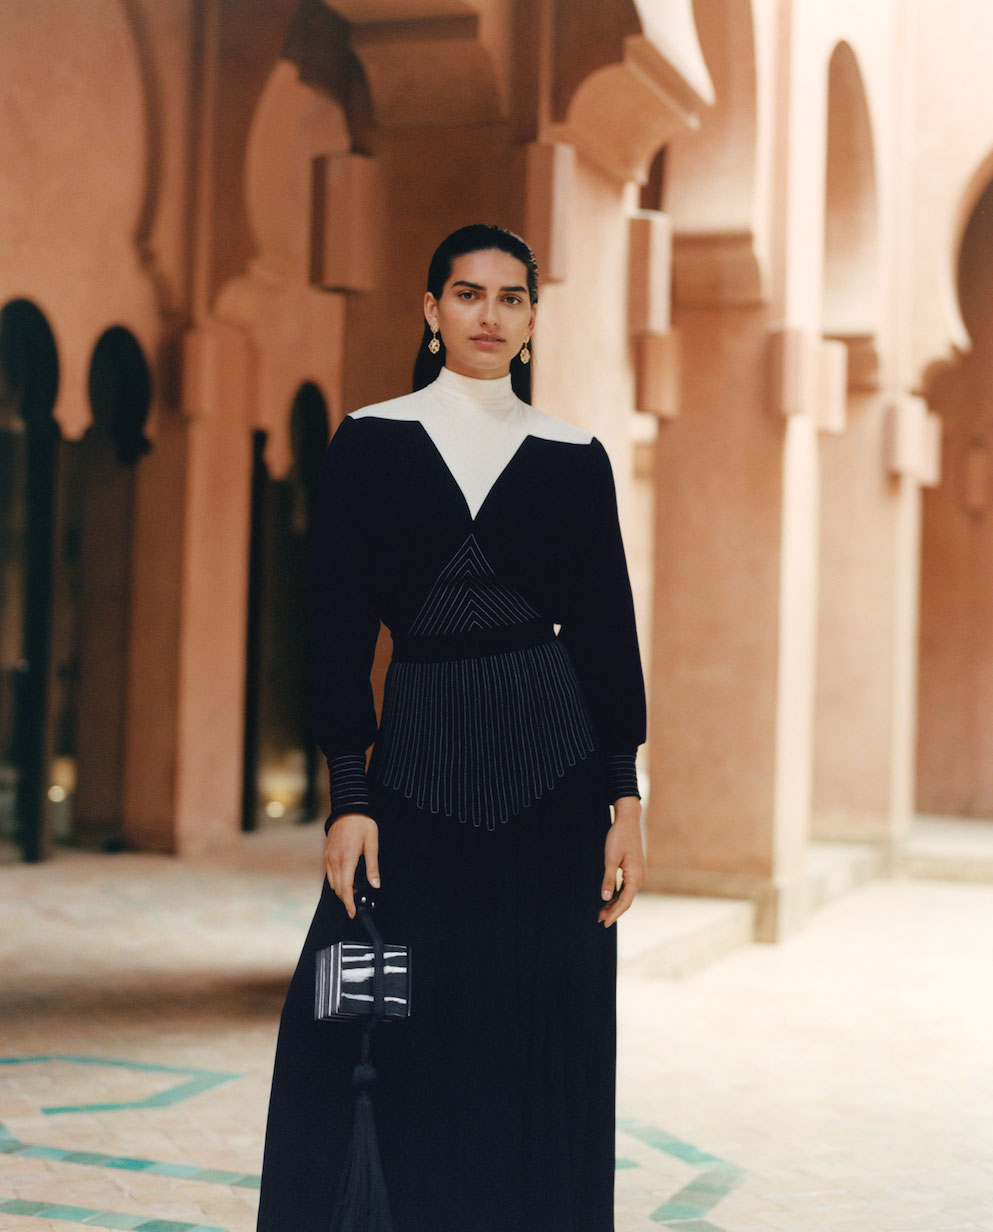 Discover NET-A-PORTER Exclusive Capsule Collections for Ramadan